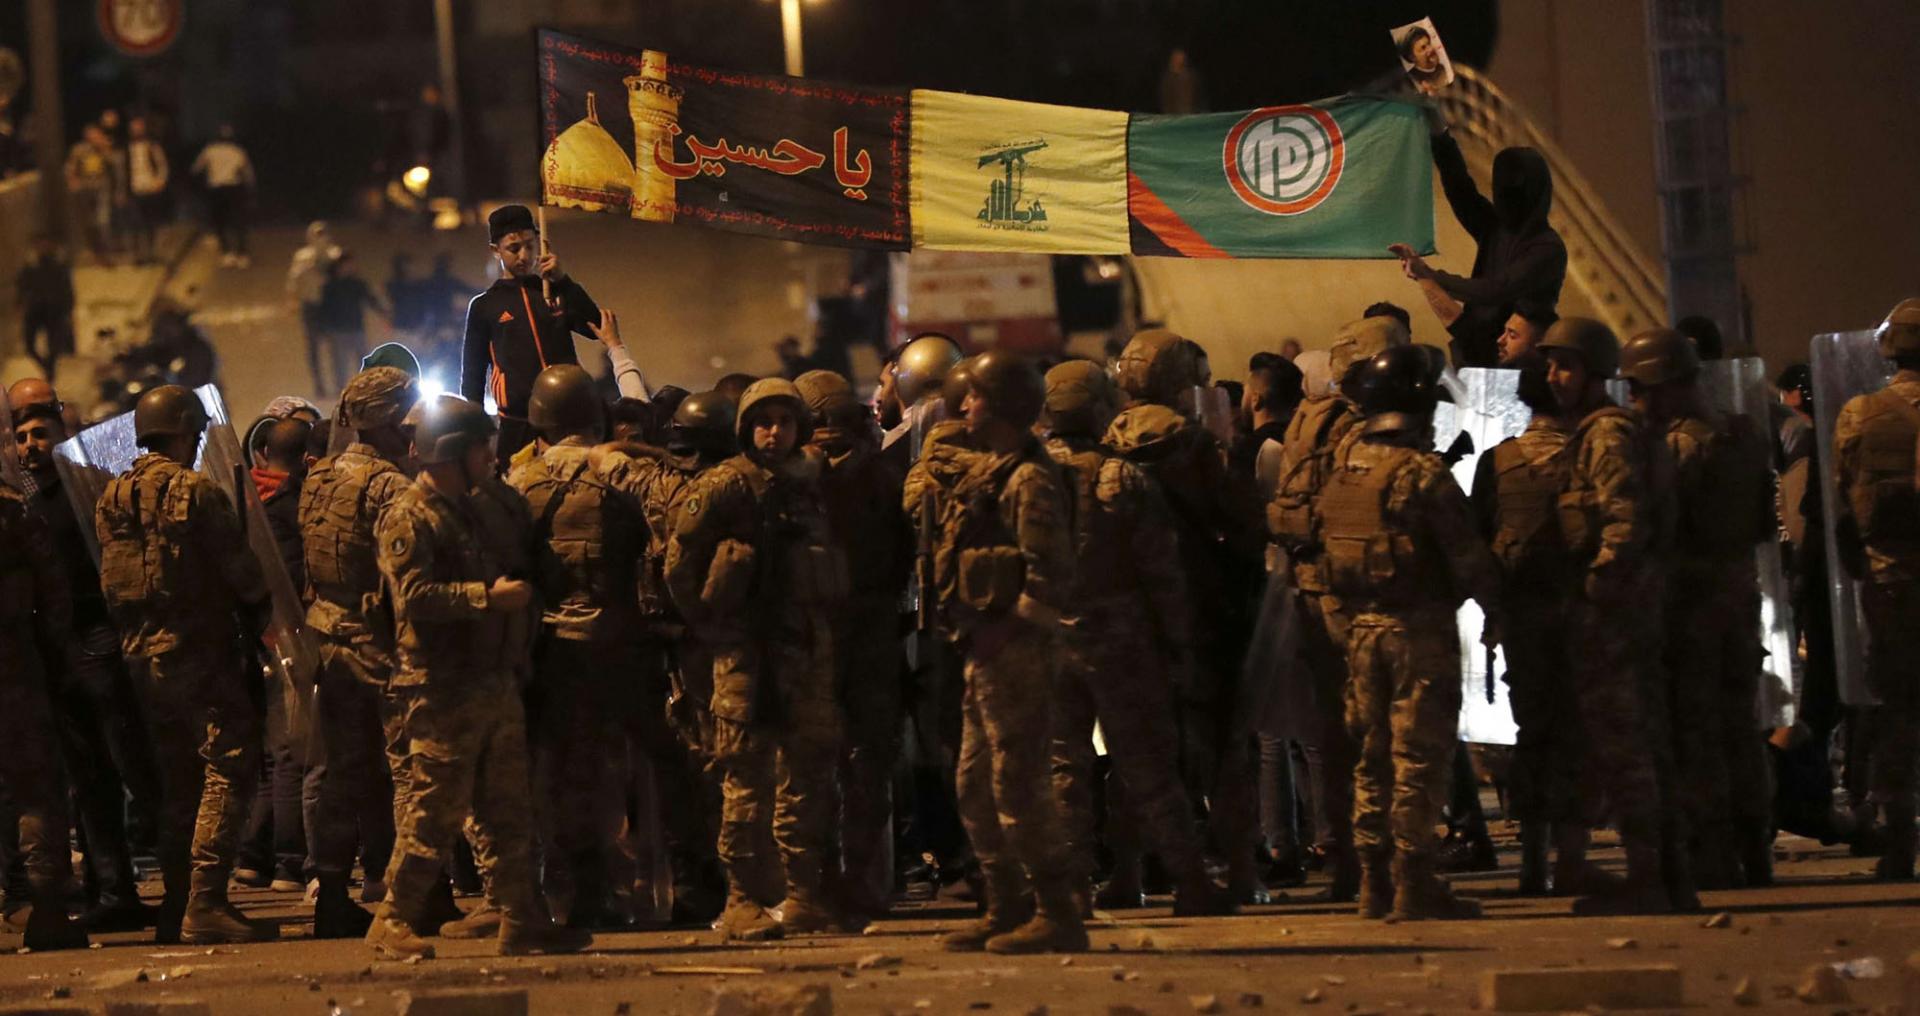 Army soldiers and riot police formed a barrier separating the protesters from the supporters of the Shi'ite groups